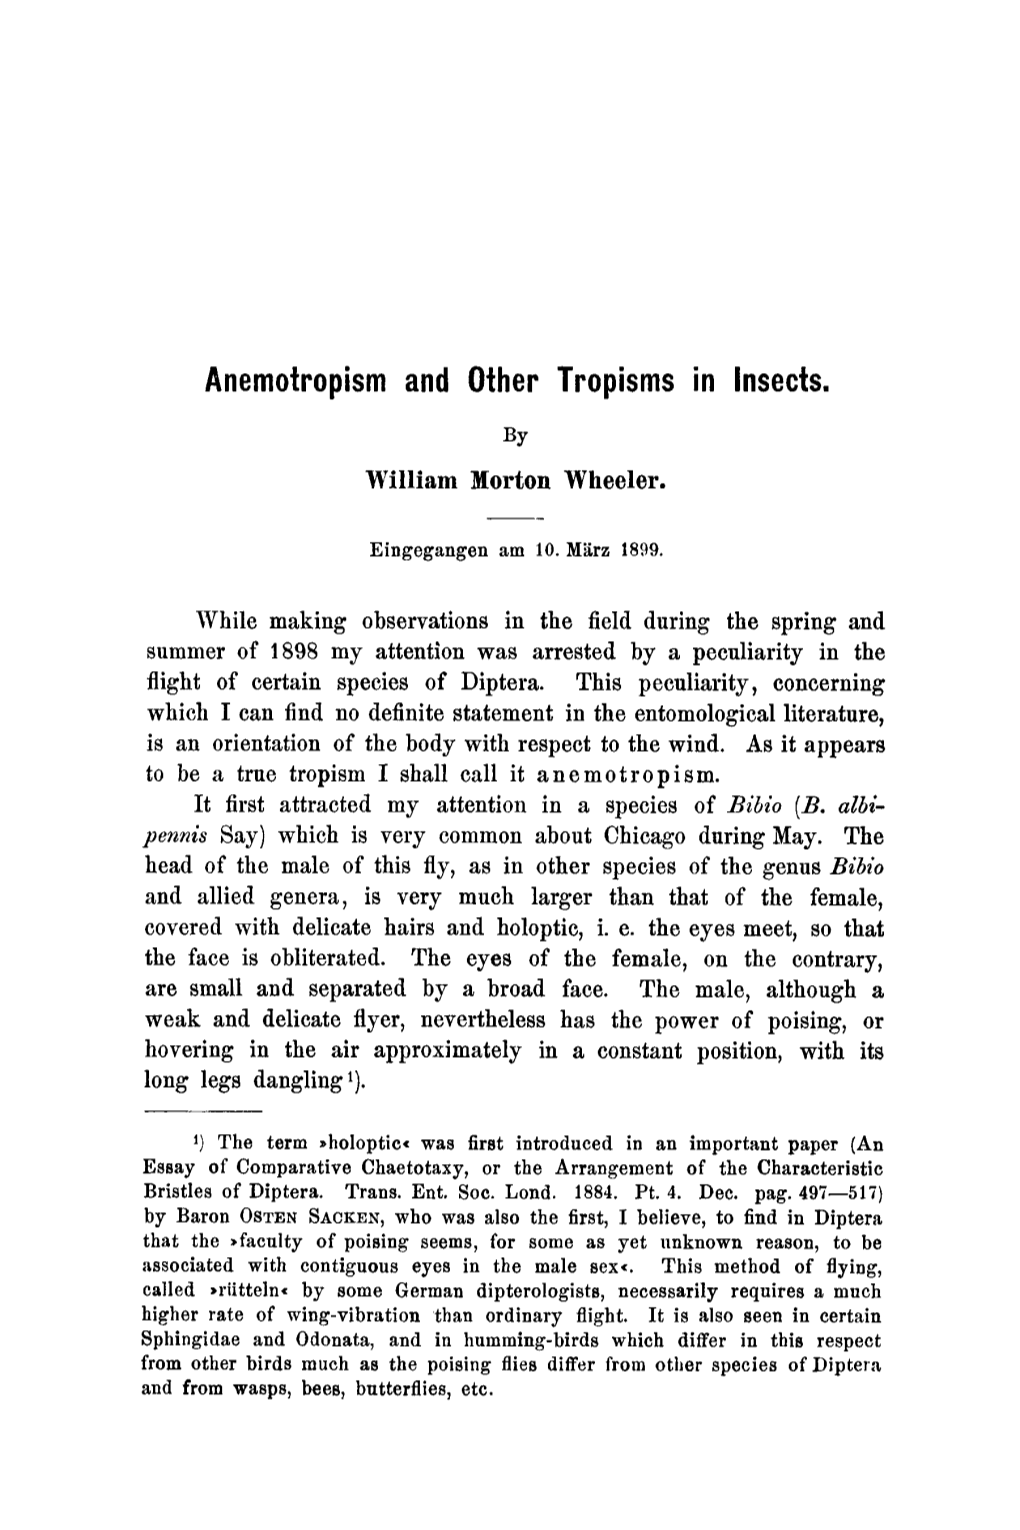 Anemotropism and Other Tropisms in Insects